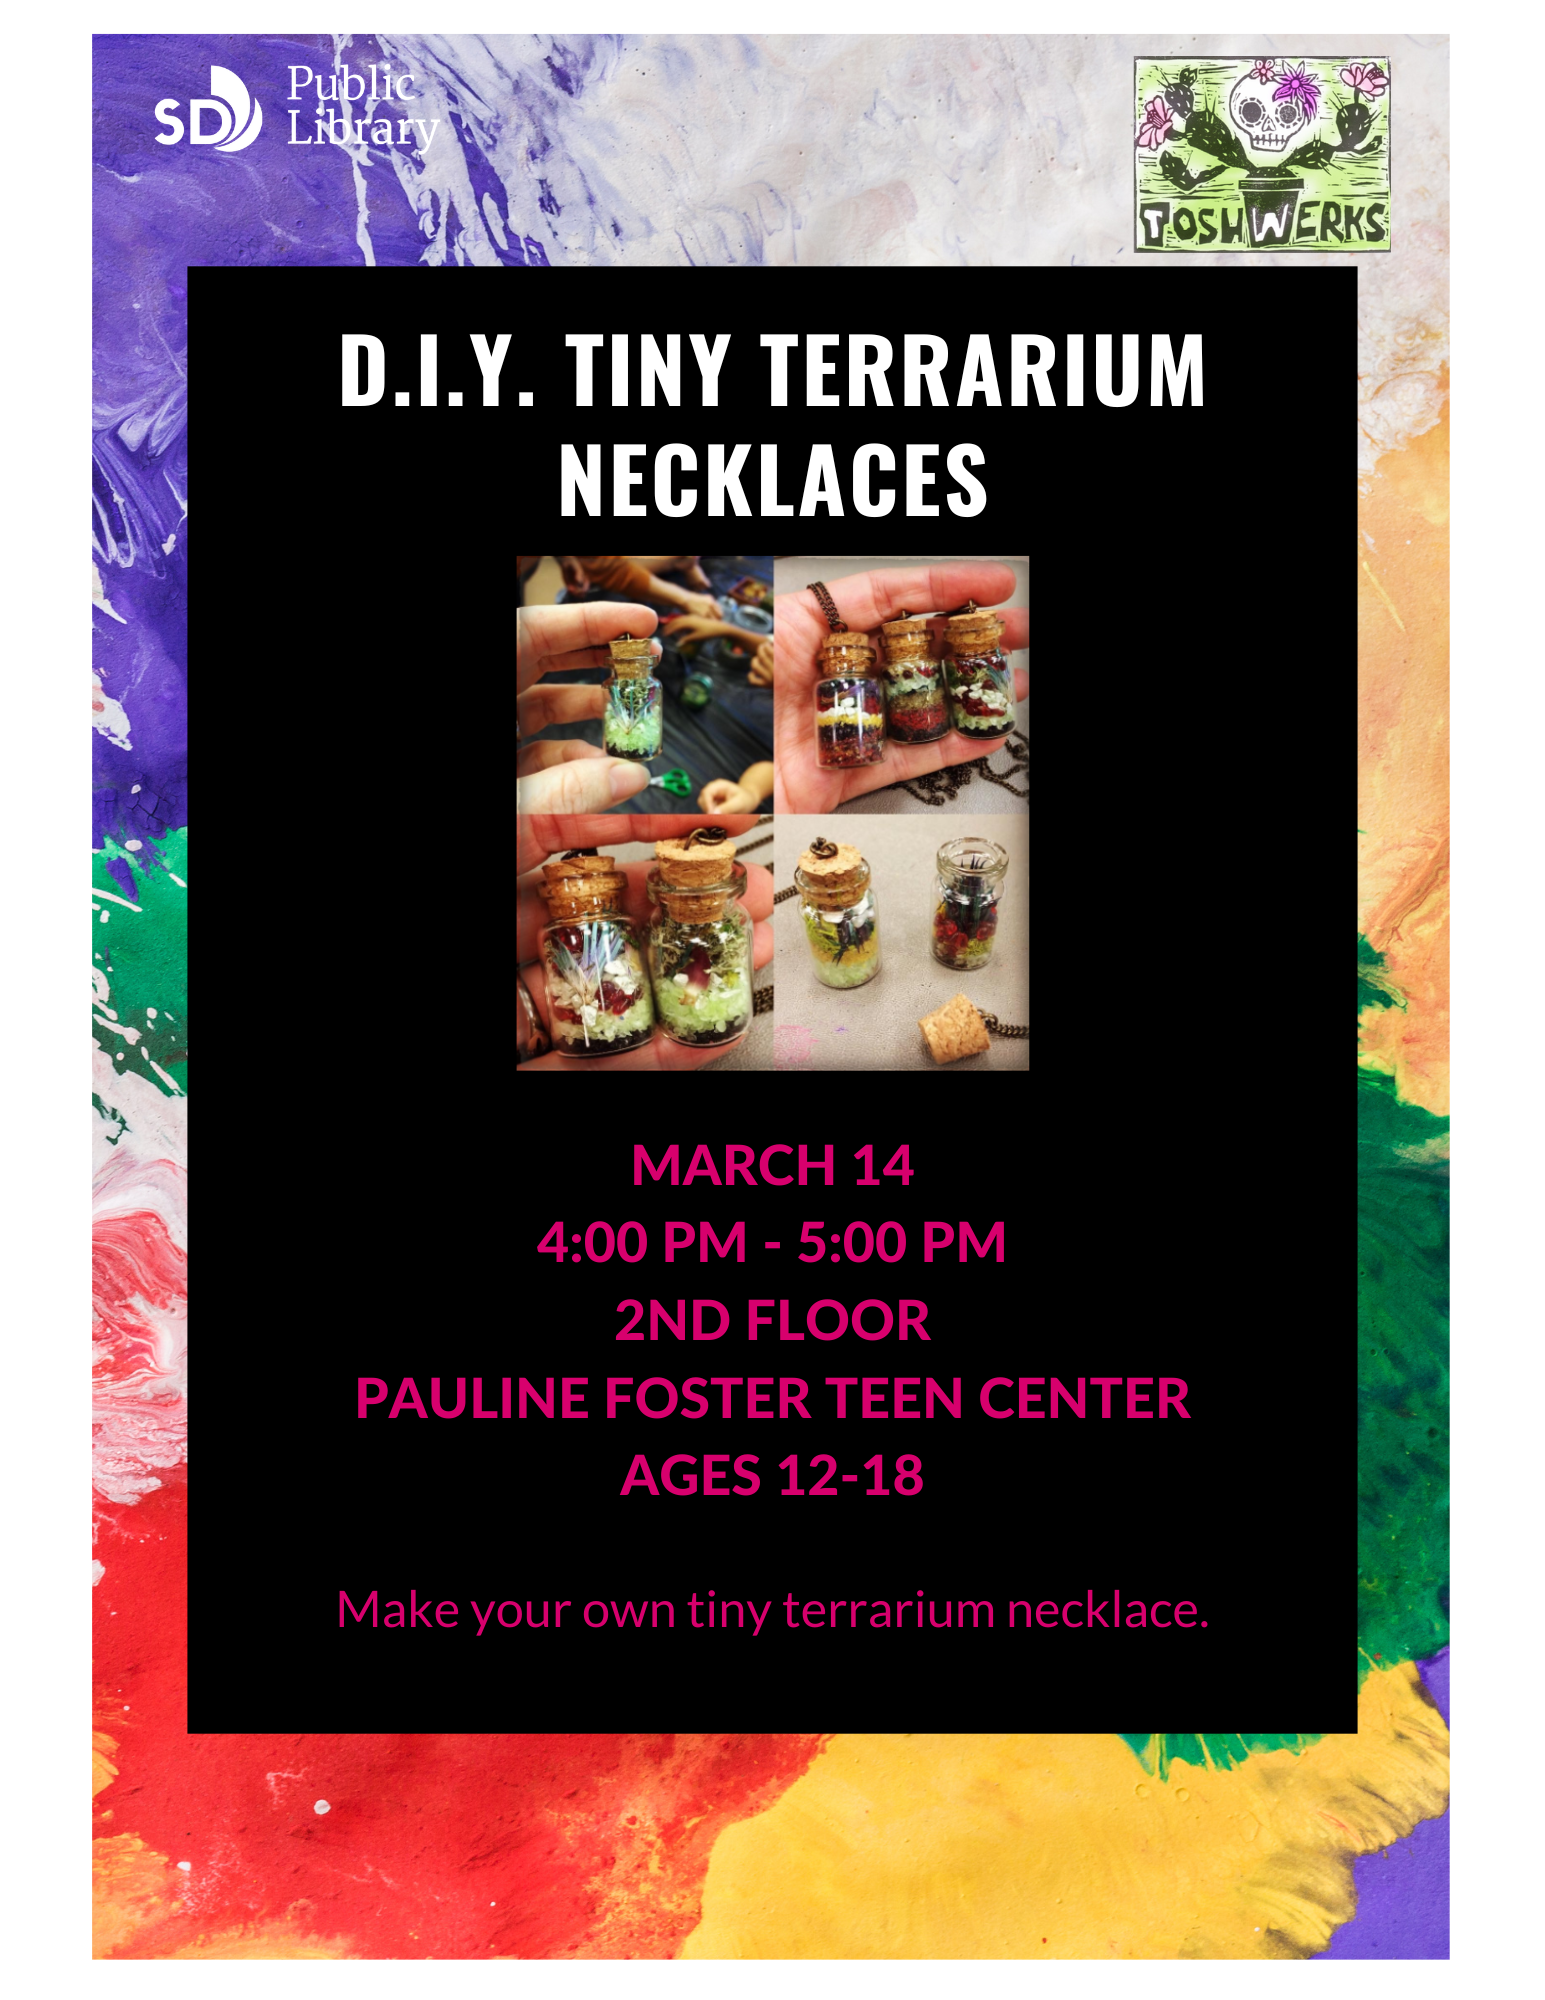 D.I.Y. Tiny Terrarium Necklaces. March 14, 4pm-5pm, 2nd floor, Pauline Foster Teen Center, Ages 12-18. Make your own tiny terrarium necklace.